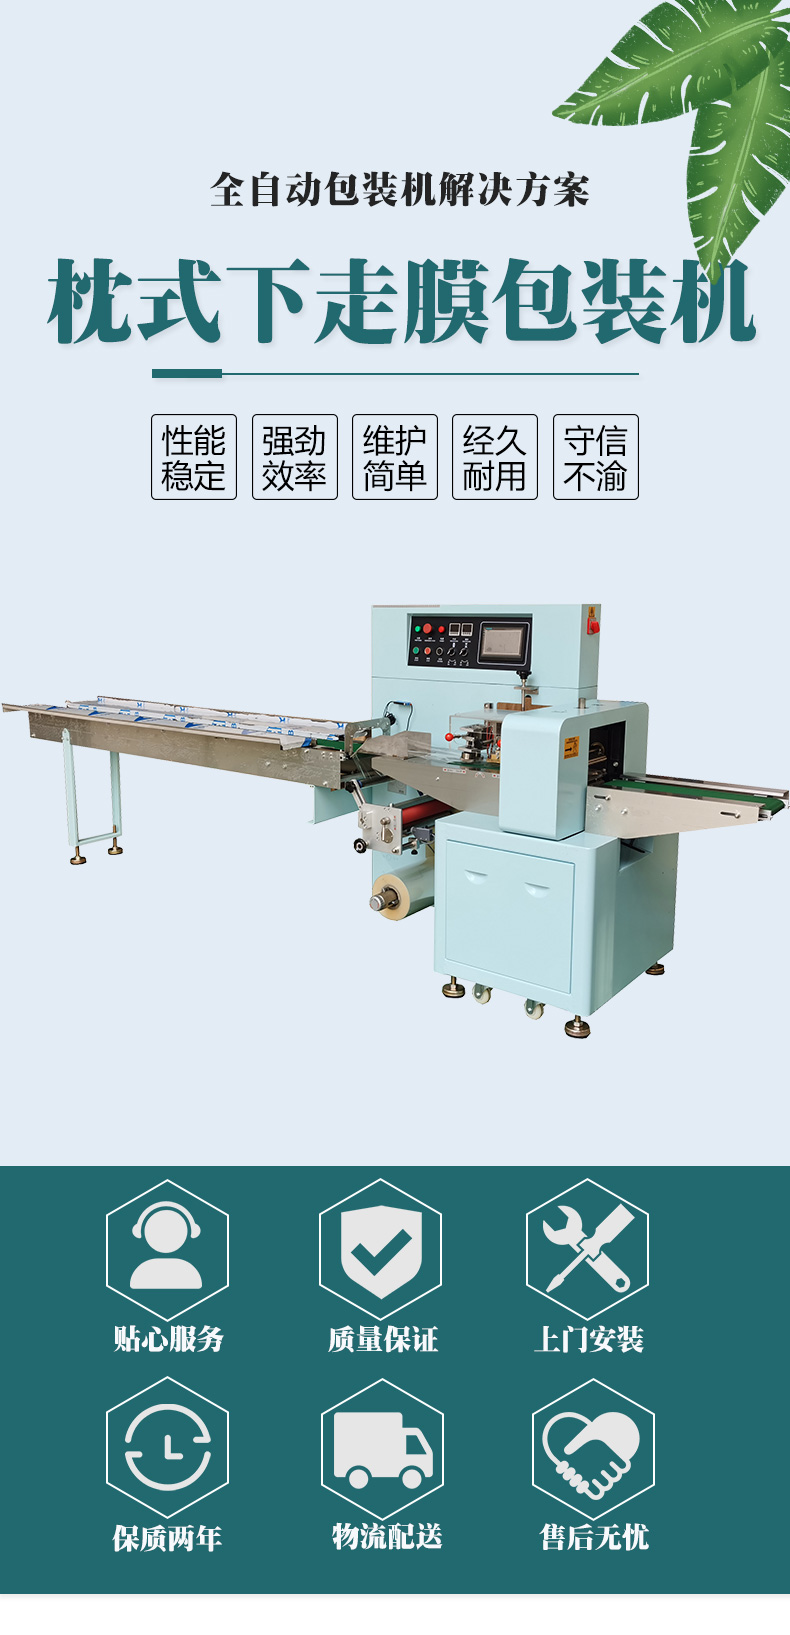 Dikai 450 Aviation Cup and Tableware Packaging Machine Supplied by the Source Manufacturer as a Disposable Cup and Paper Cup Packaging Machine